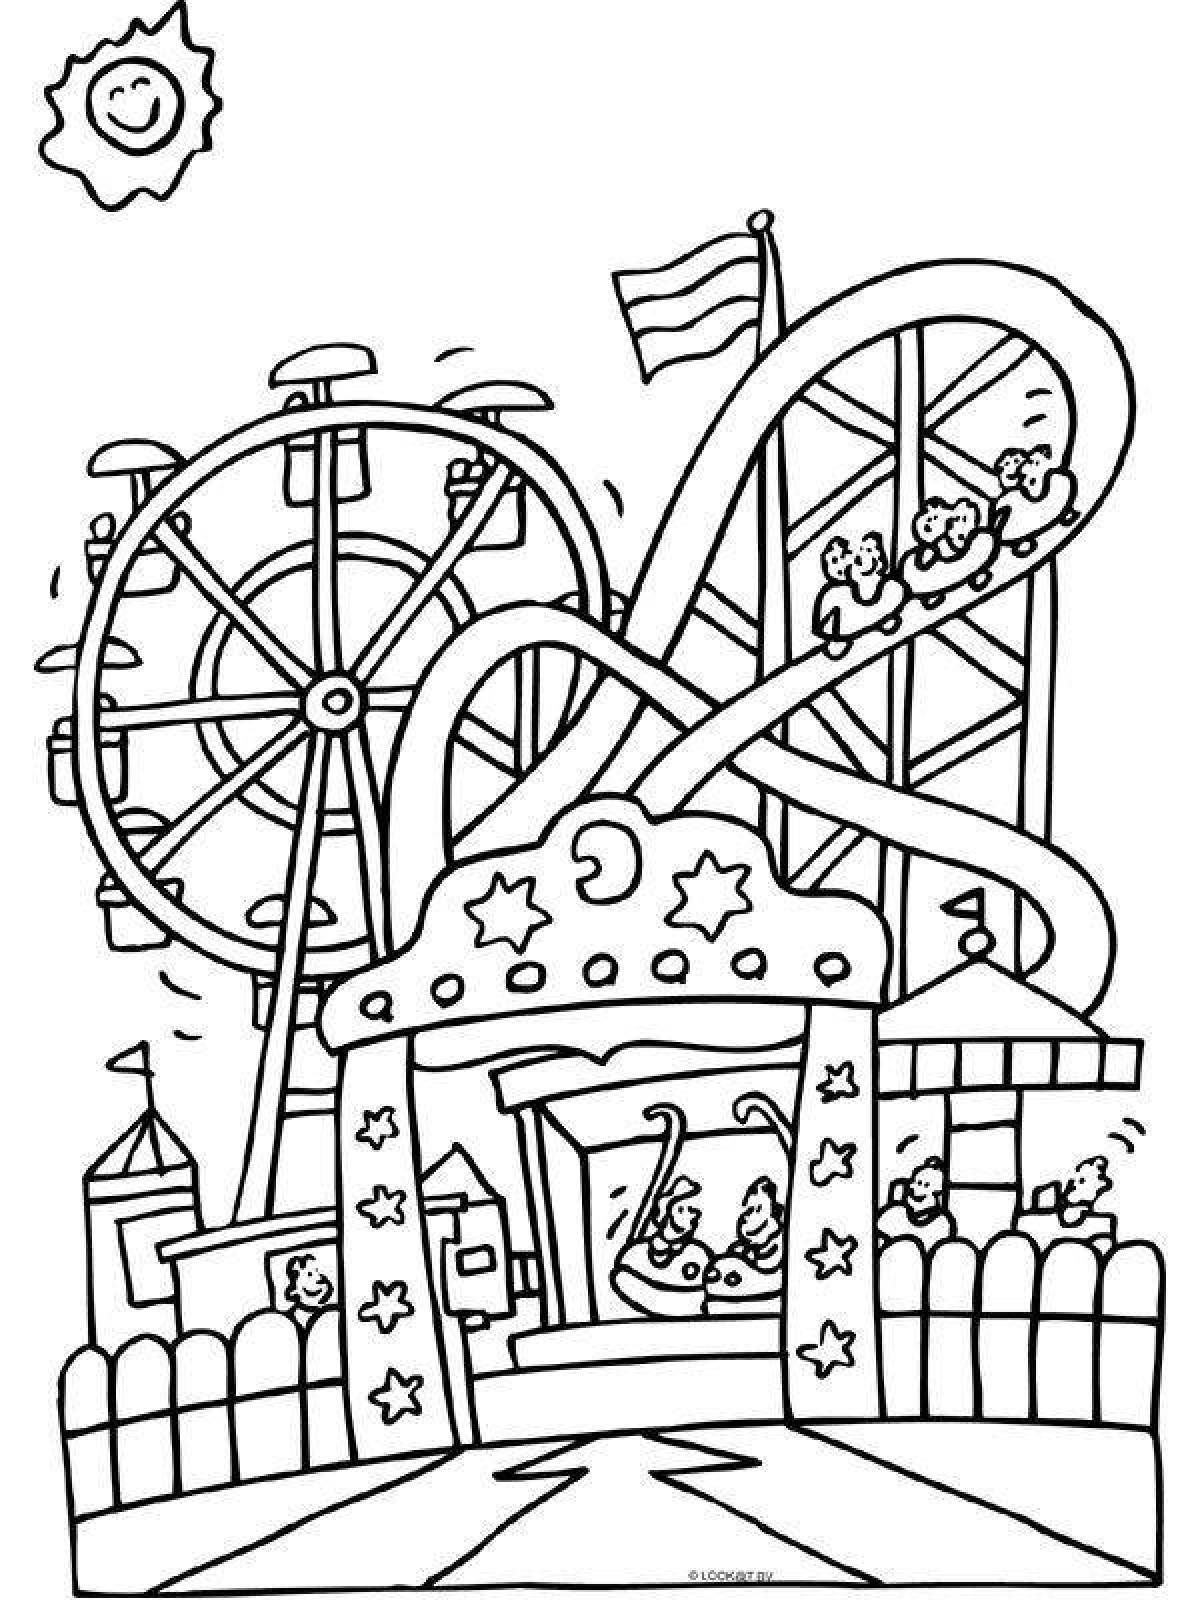 Coloring page funny park